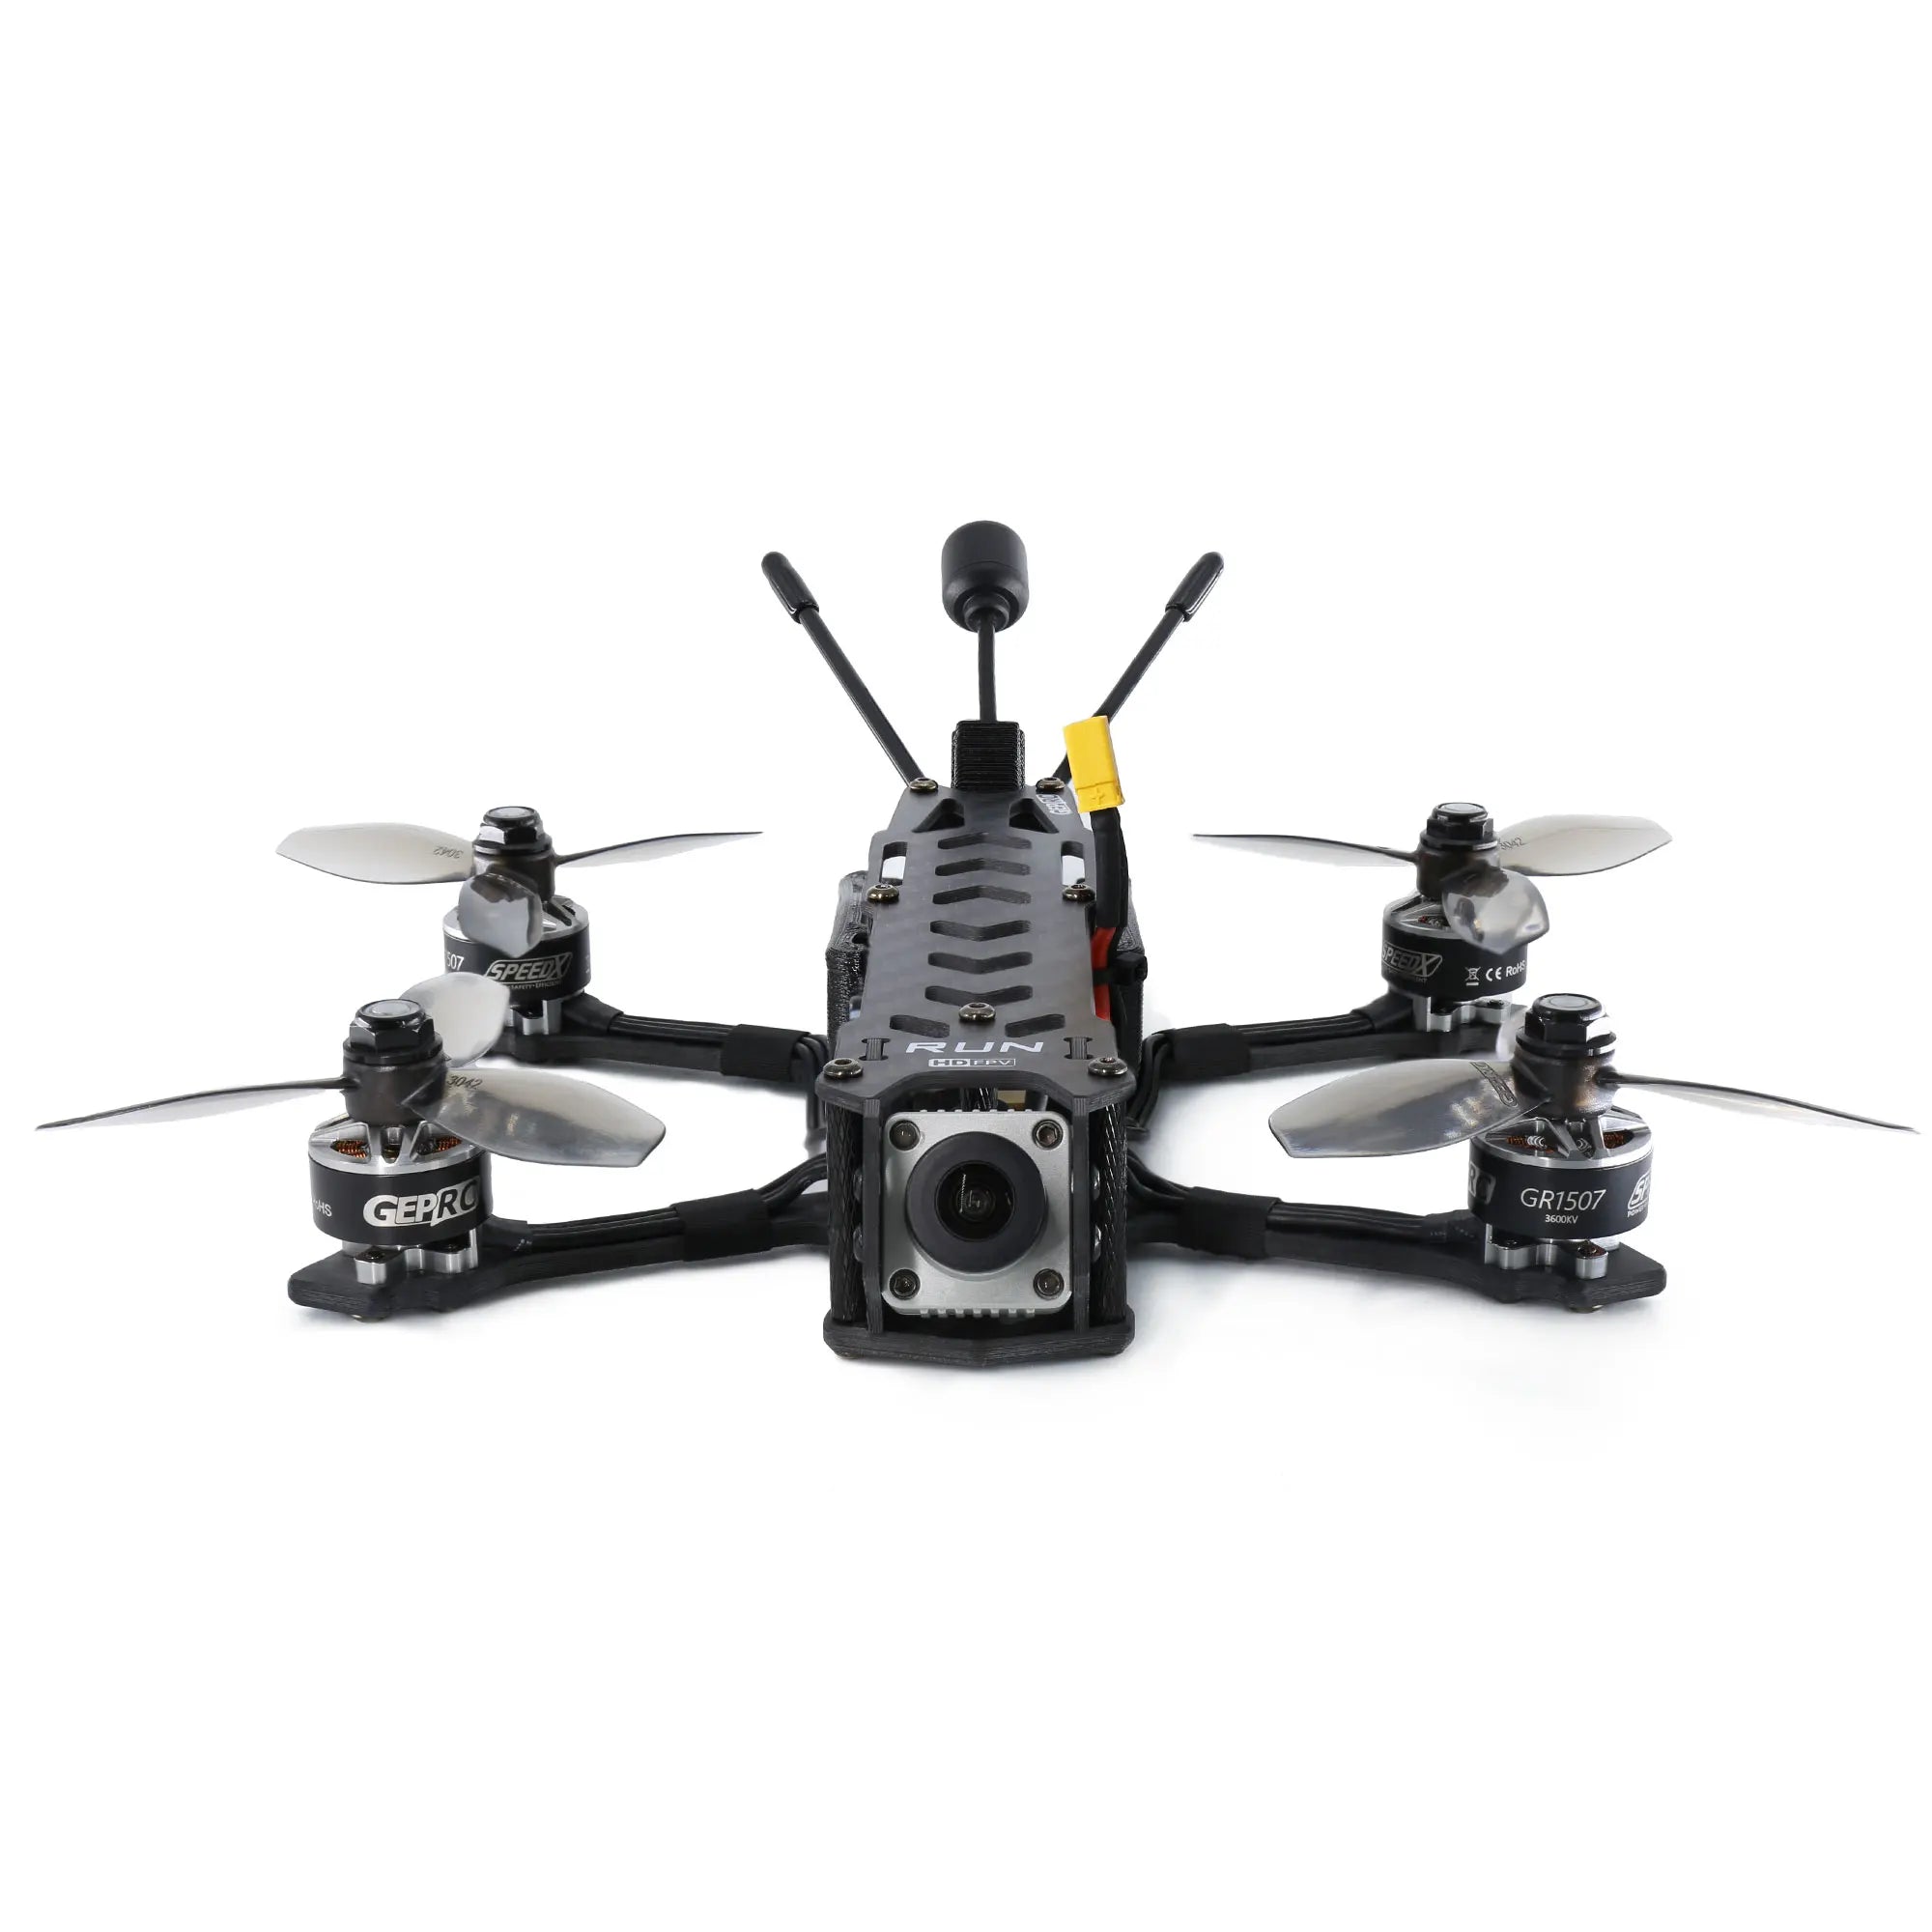 GEPRC RUN HD3, Determine whether you plan to use the drone for freestyle flying, cinematography, or any